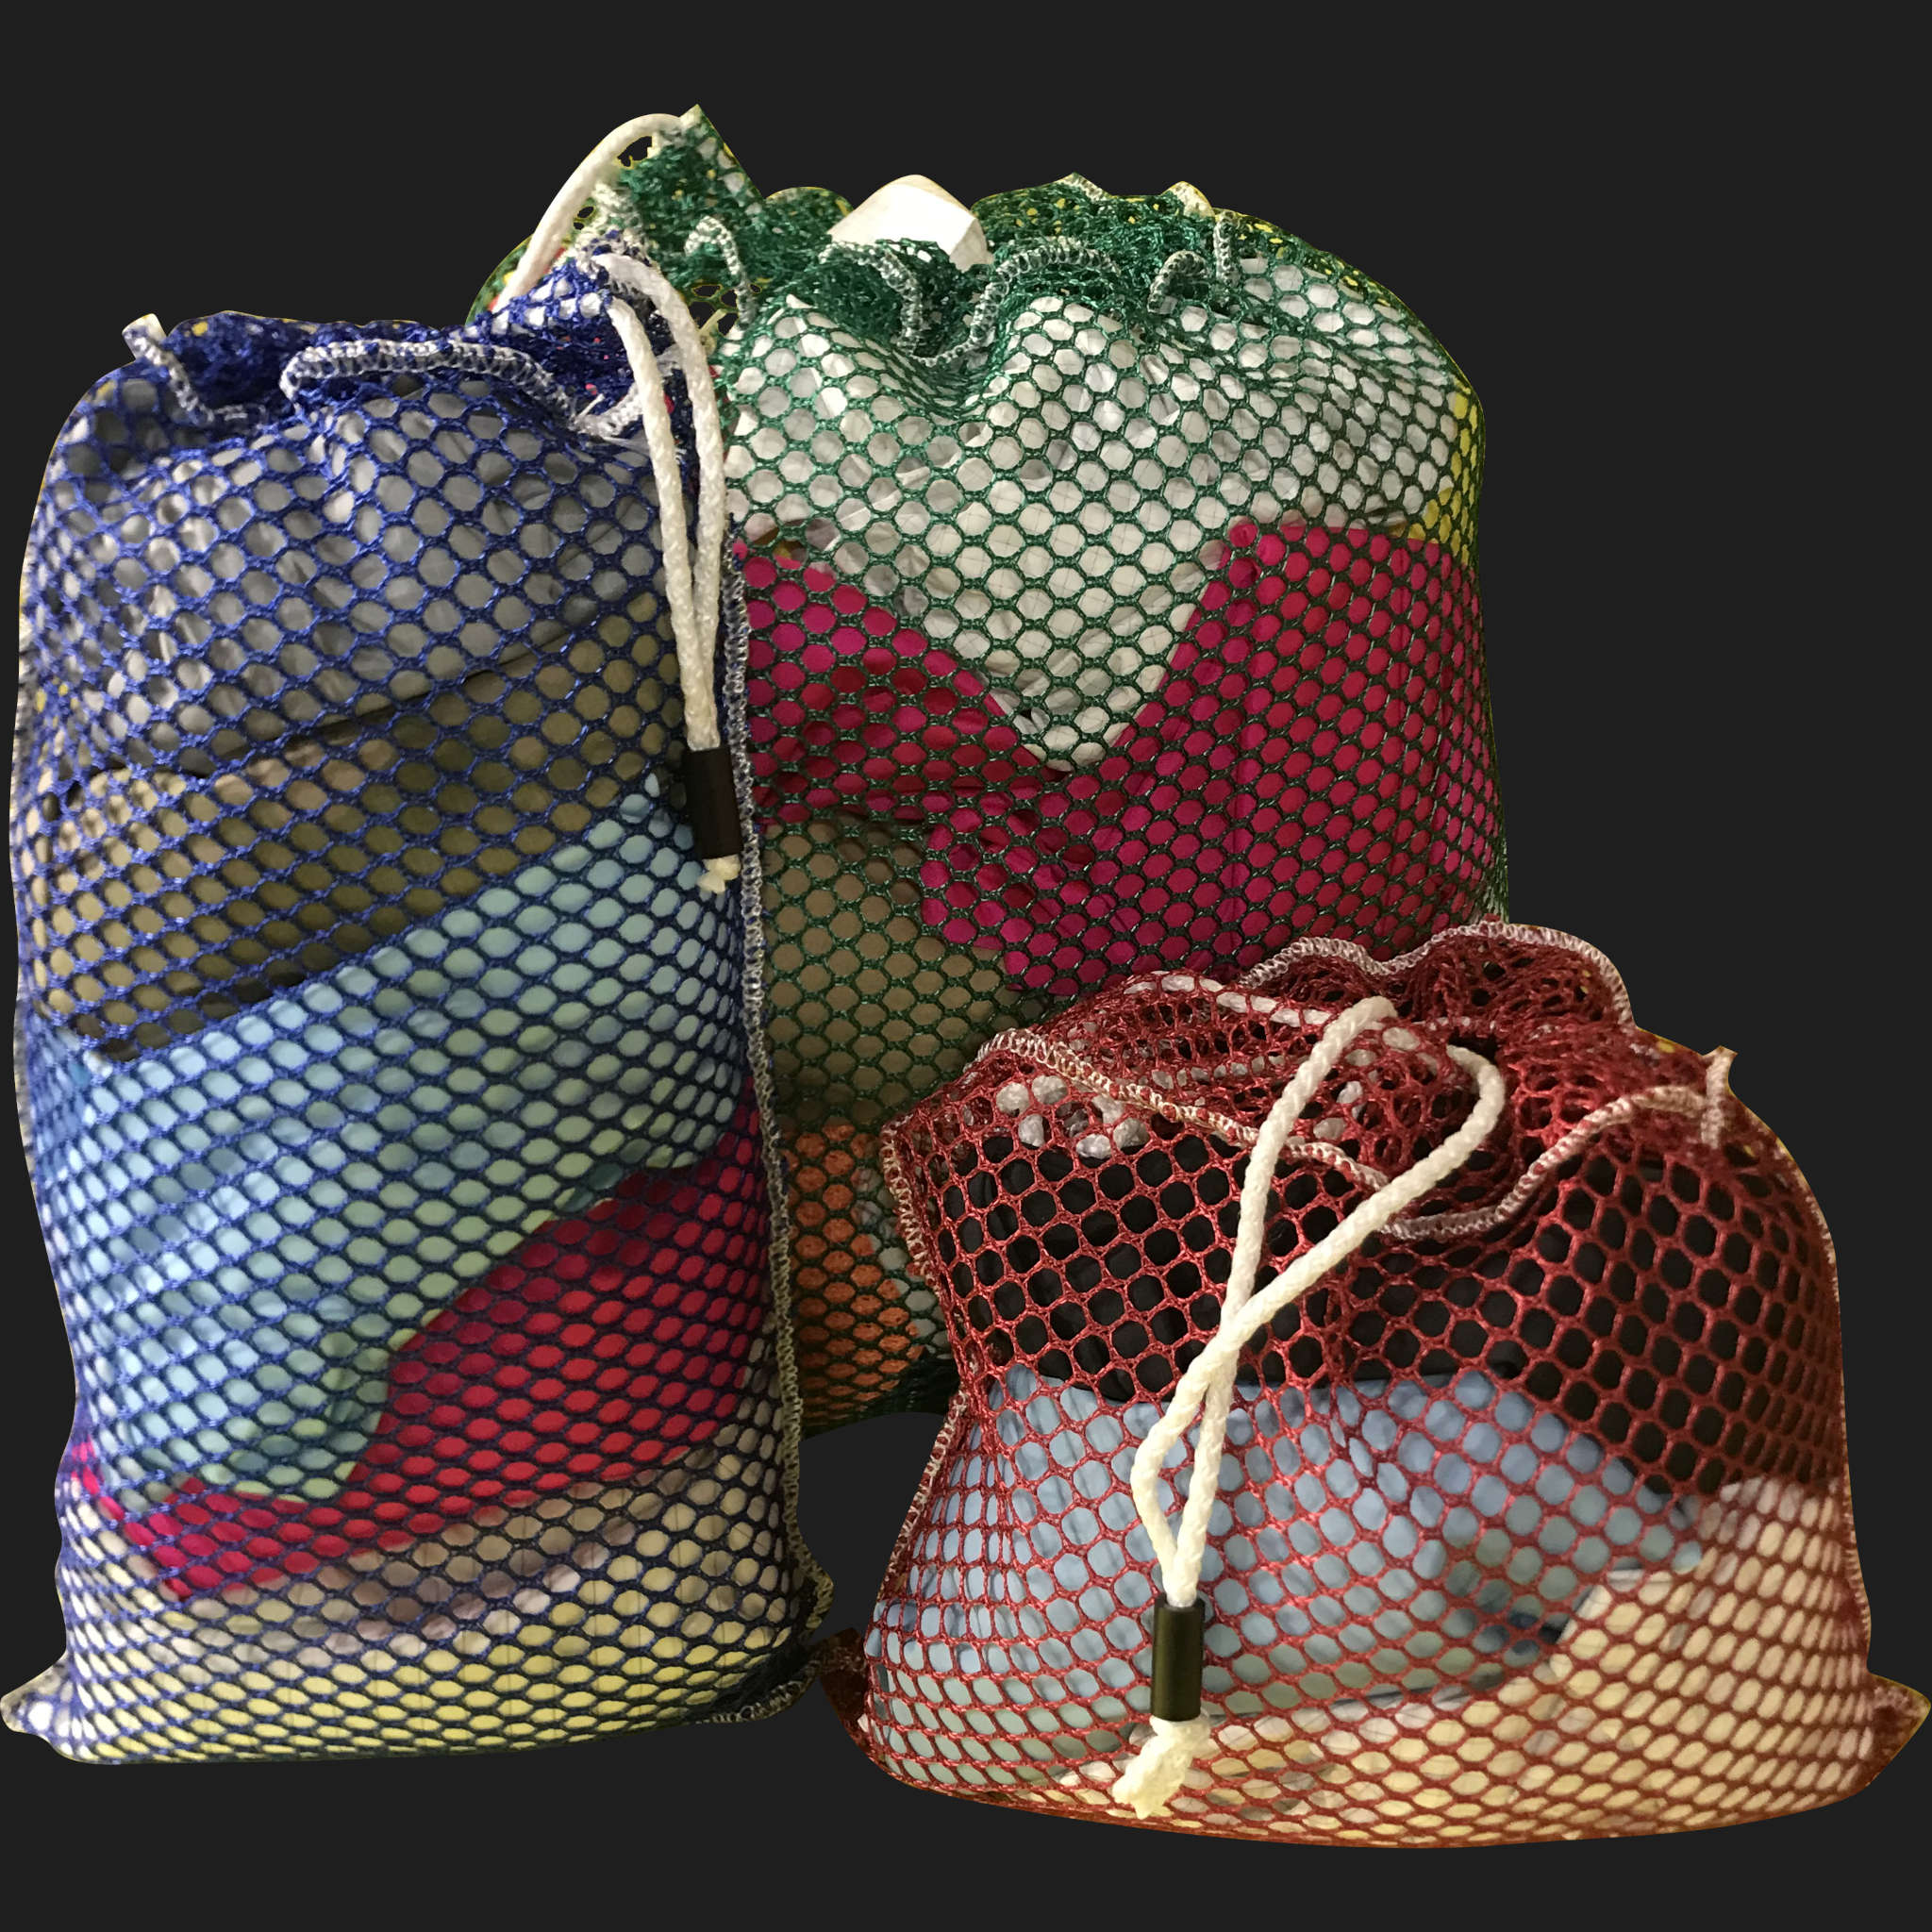 28" x 56" Customized Mesh-Net-Laundry Bags Heavy Duty with Cord and barrellock closure